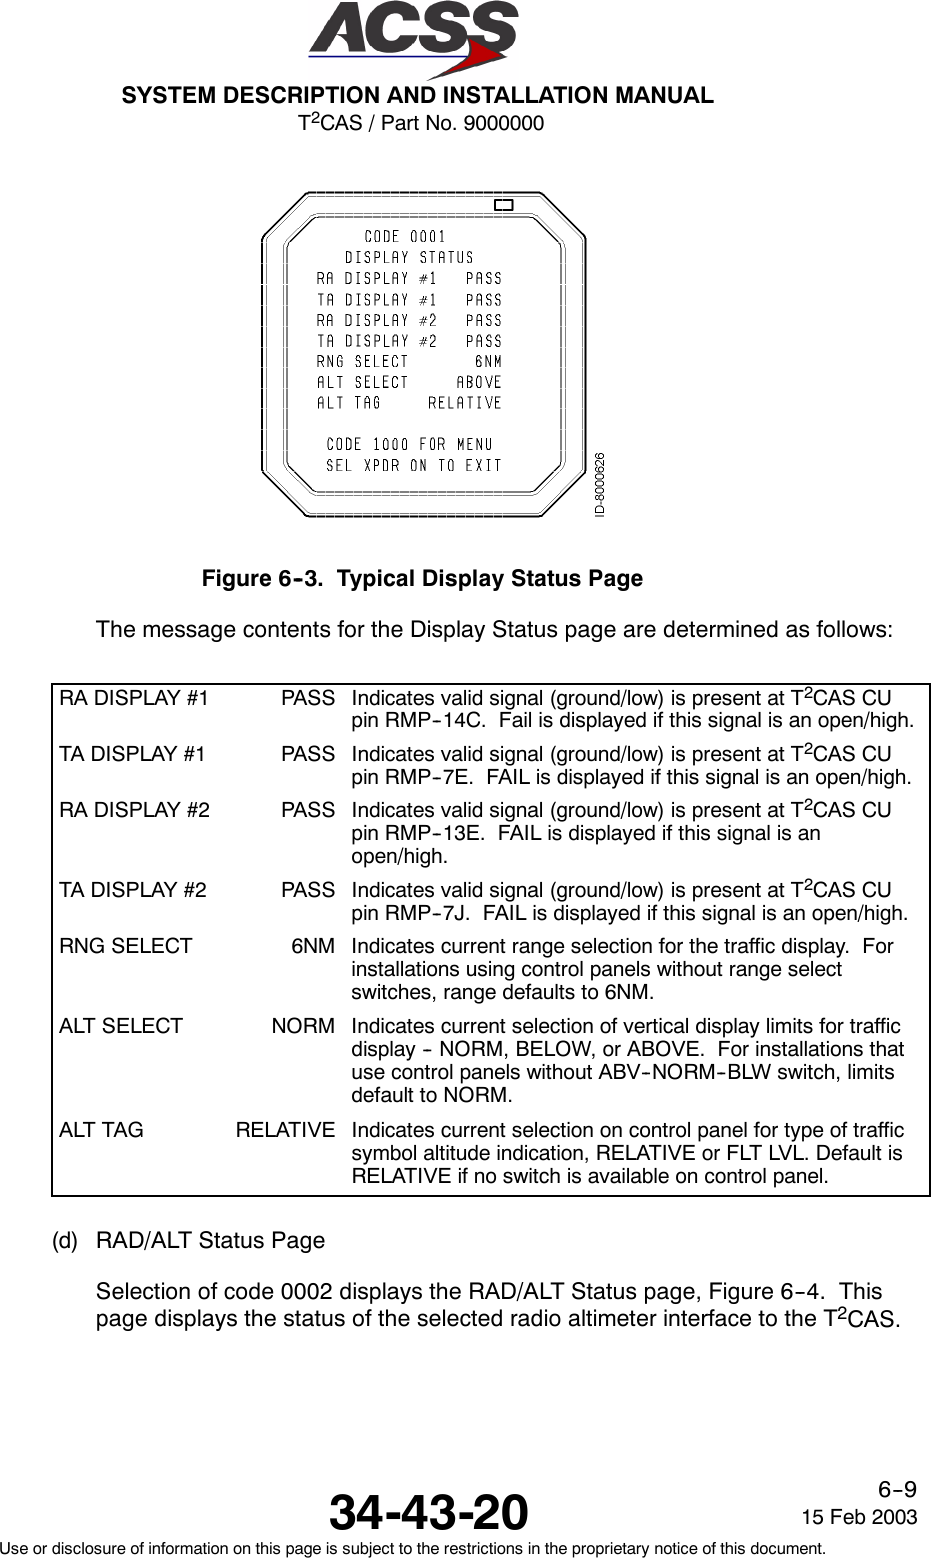 T2CAS / Part No. 9000000SYSTEM DESCRIPTION AND INSTALLATION MANUAL34-43-20 15 Feb 2003Use or disclosure of information on this page is subject to the restrictions in the proprietary notice of this document.6--9Figure 6--3. Typical Display Status PageThe message contents for the Display Status page are determined as follows:RA DISPLAY #1 PASS Indicates valid signal (ground/low) is present at T2CAS CUpin RMP--14C. Fail is displayed if this signal is an open/high.TA DISPLAY #1 PASS Indicates valid signal (ground/low) is present at T2CAS CUpin RMP--7E. FAIL is displayed if this signal is an open/high.RA DISPLAY #2 PASS Indicates valid signal (ground/low) is present at T2CAS CUpin RMP--13E. FAIL is displayed if this signal is anopen/high.TA DISPLAY #2 PASS Indicates valid signal (ground/low) is present at T2CAS CUpin RMP--7J. FAIL is displayed if this signal is an open/high.RNG SELECT 6NM Indicates current range selection for the traffic display. Forinstallations using control panels without range selectswitches, range defaults to 6NM.ALT SELECT NORM Indicates current selection of vertical display limits for trafficdisplay -- NORM, BELOW, or ABOVE. For installations thatuse control panels without ABV--NORM--BLW switch, limitsdefault to NORM.ALT TAG RELATIVE Indicates current selection on control panel for type of trafficsymbol altitude indication, RELATIVE or FLT LVL. Default isRELATIVE if no switch is available on control panel.(d) RAD/ALT Status PageSelection of code 0002 displays the RAD/ALT Status page, Figure 6--4. Thispage displays the status of the selected radio altimeter interface to the T2CAS.